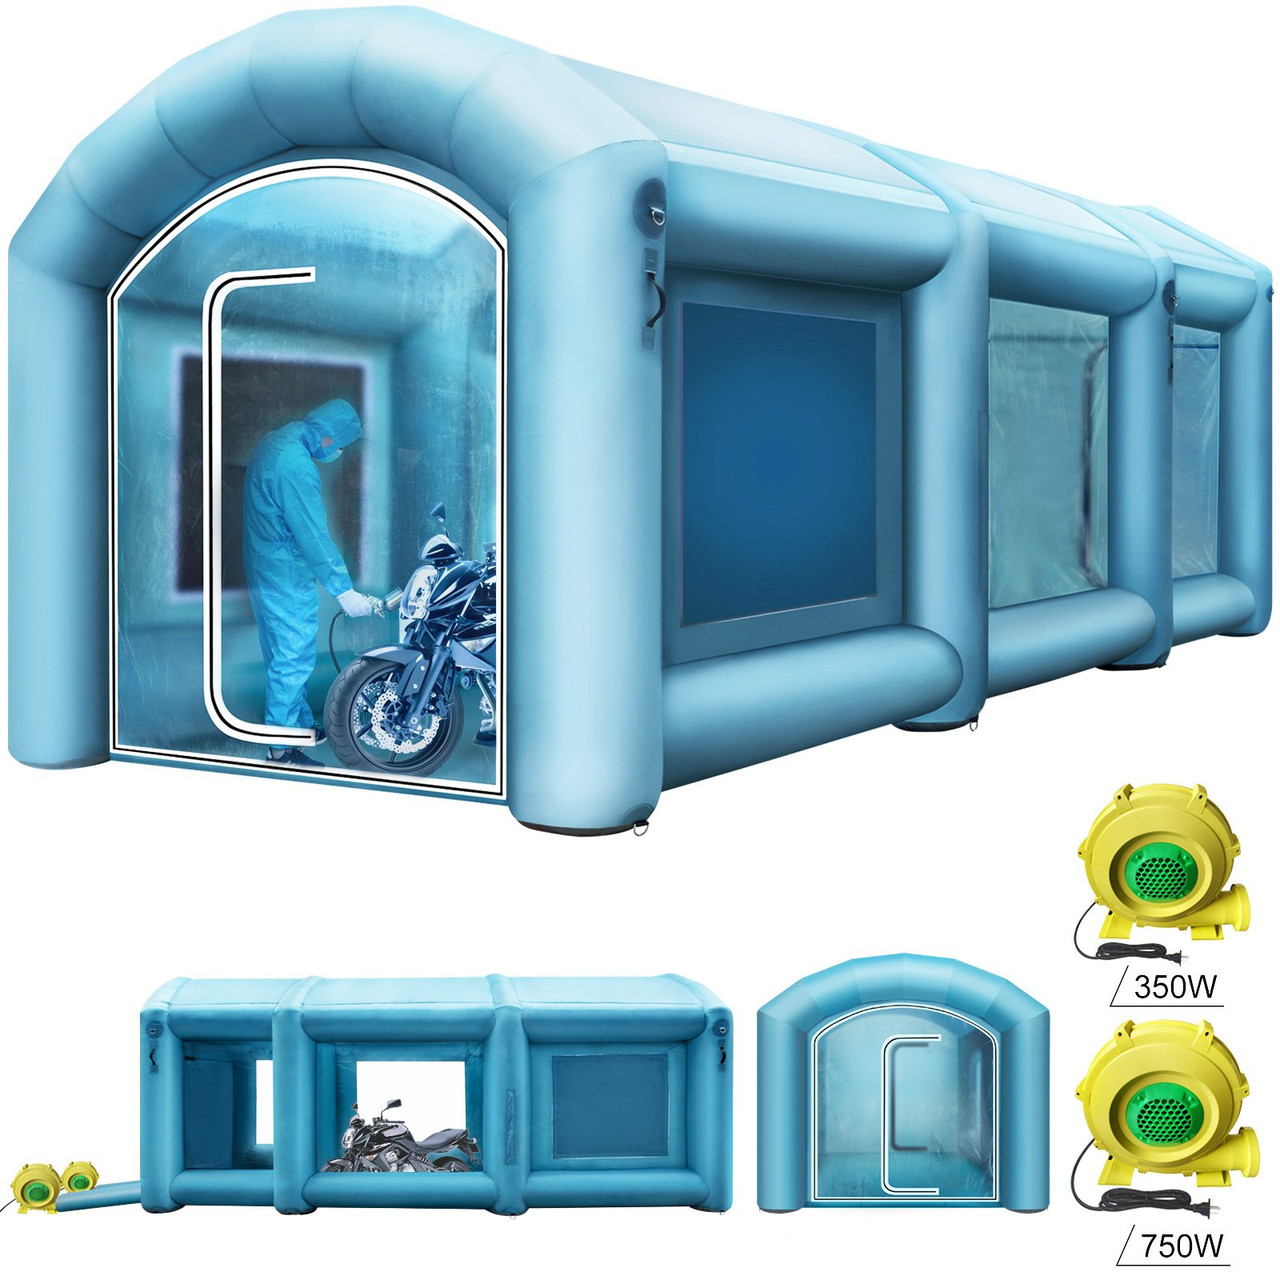 Inflatable Paint Booth, 20x10x 8 ft Spray Paint Booth, High Powerful 750W+350W Blowers Inflatable Spray Booth with Air Filter System Portable Car Paint Booth for Car Parking Tent Workstation